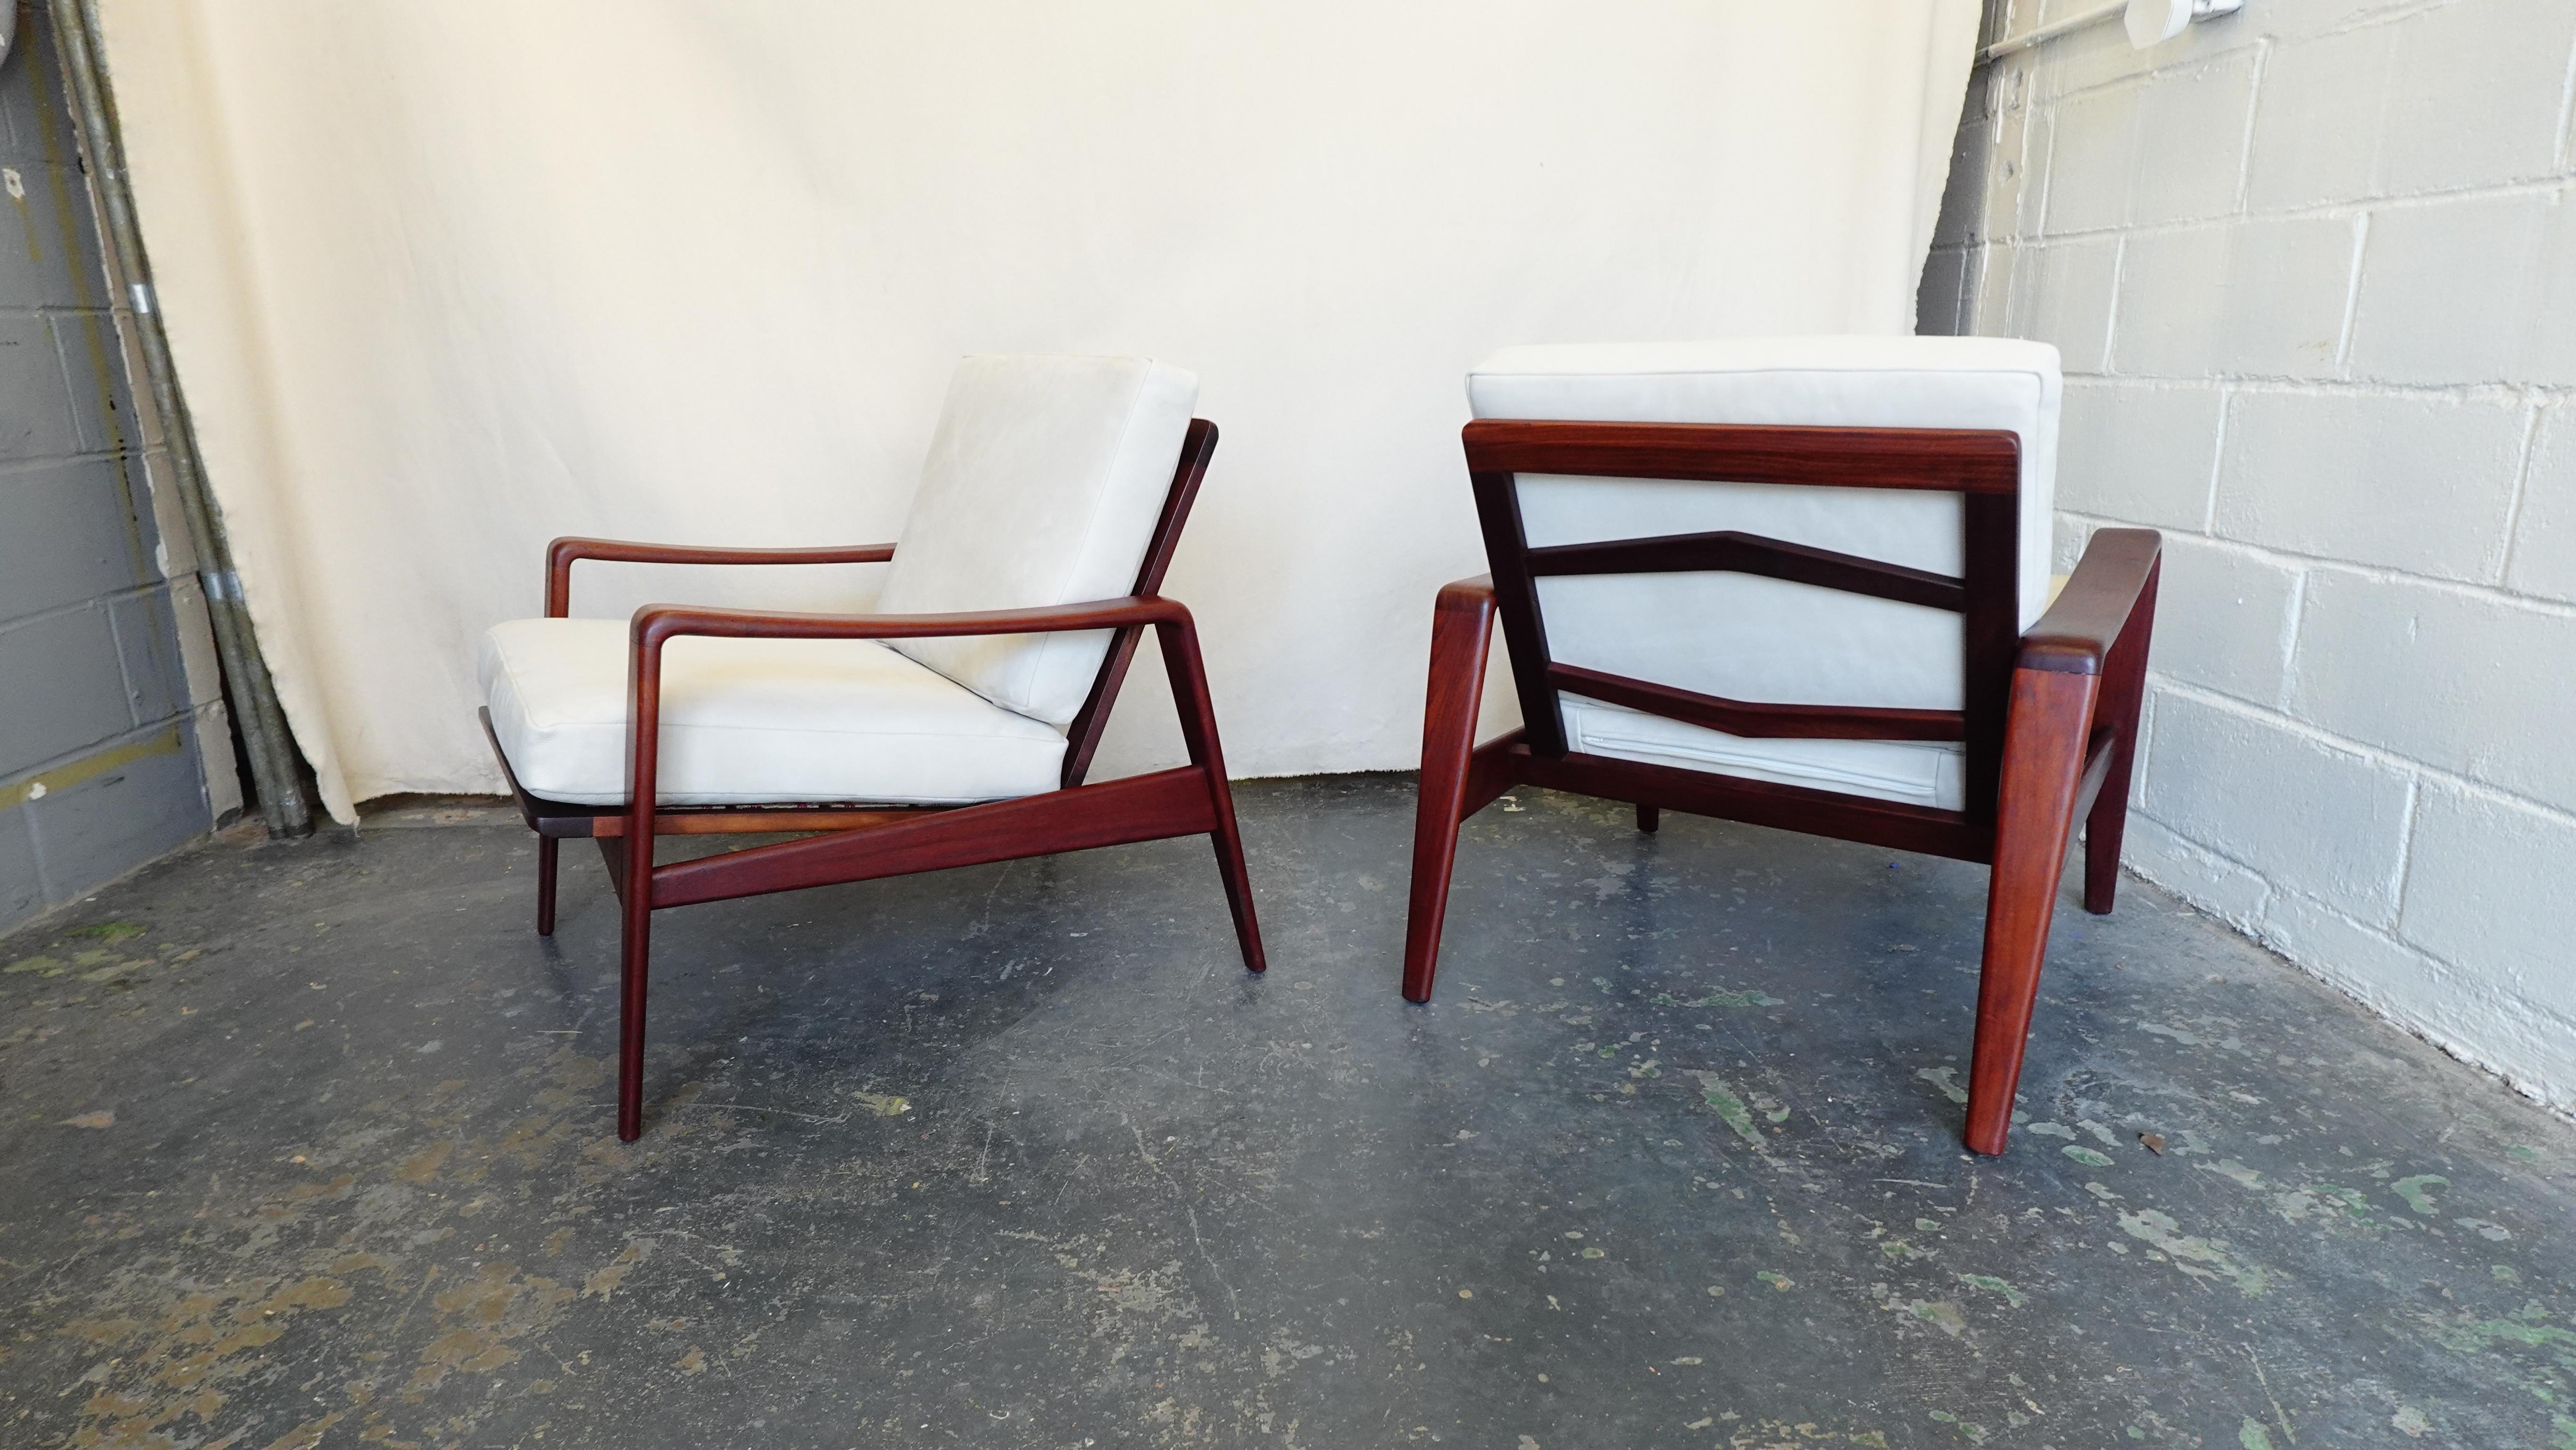 Pair of Arne Wahl Iverson Lounge Chairs for Komfort in Teak & Leather, 1960 For Sale 8